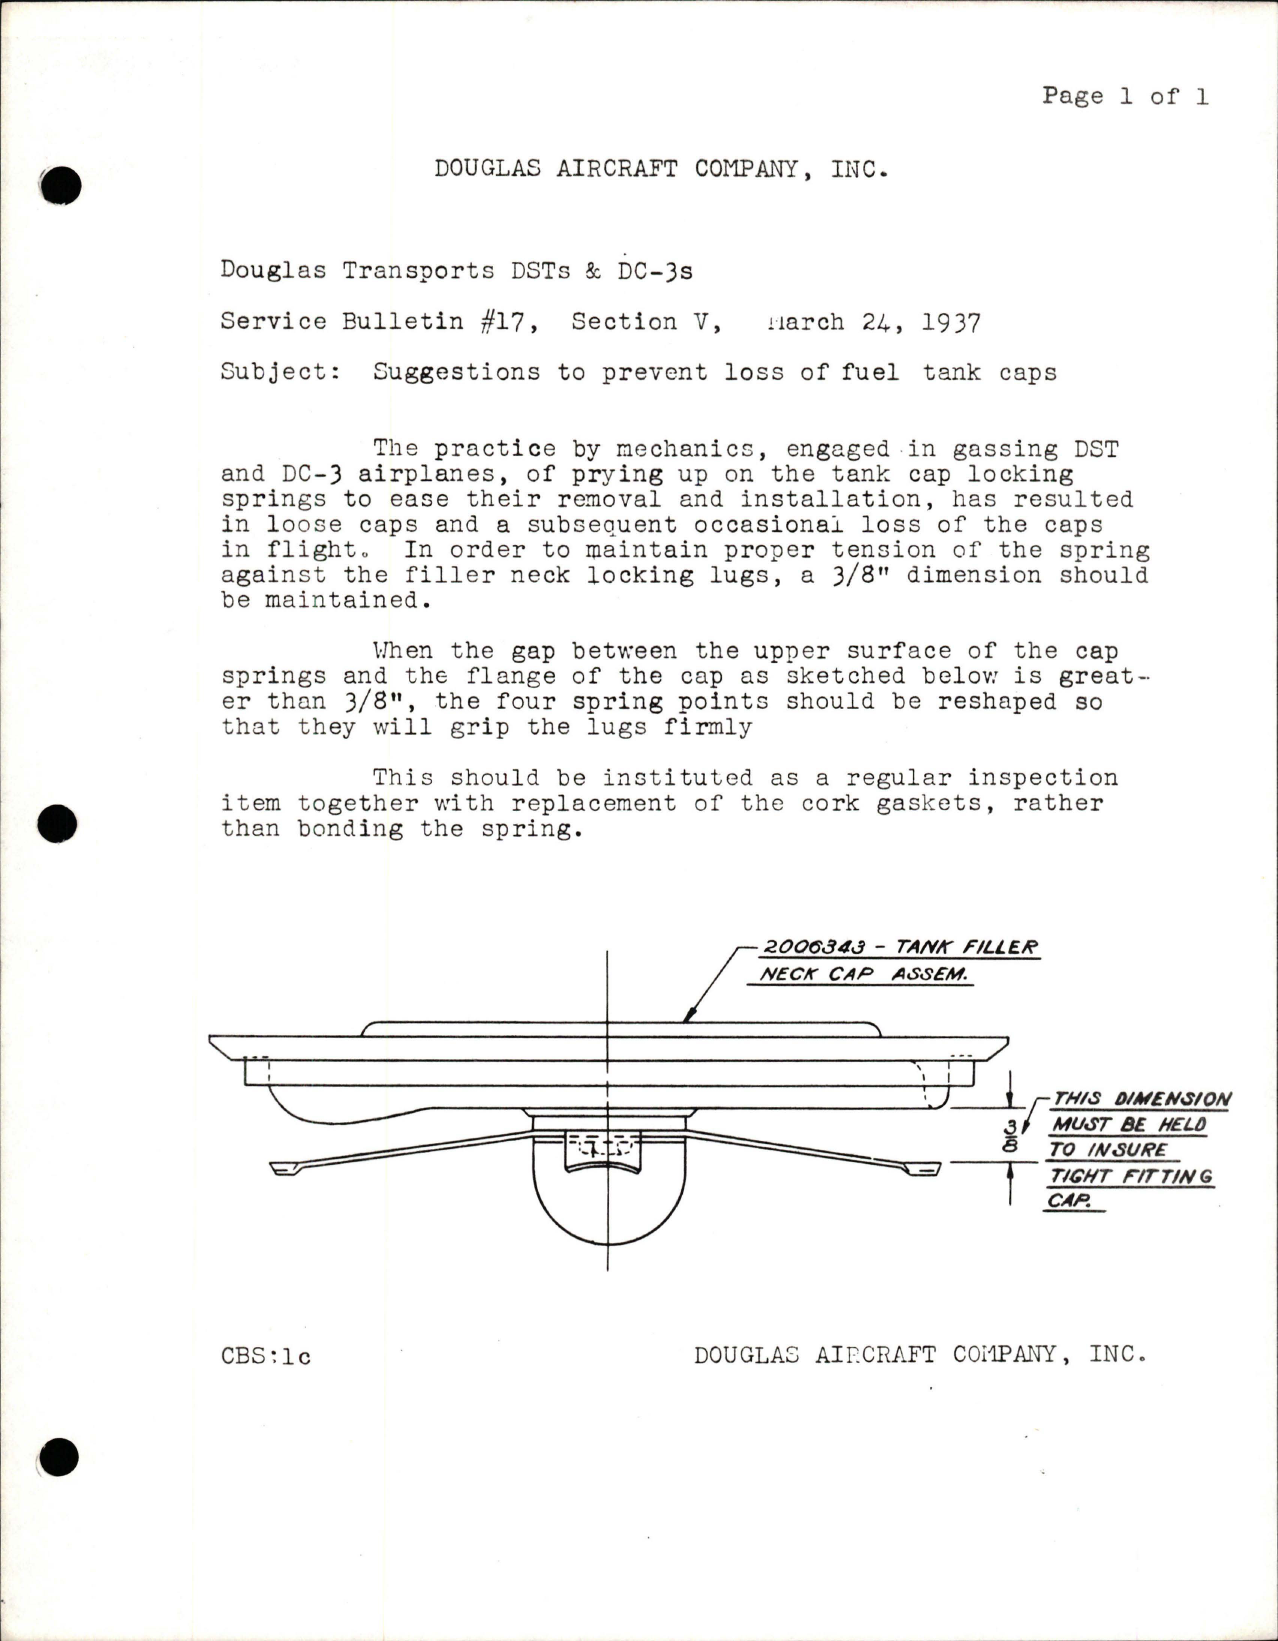 Sample page 1 from AirCorps Library document: Suggestions to Prevent Loss of Fuel Tank Caps